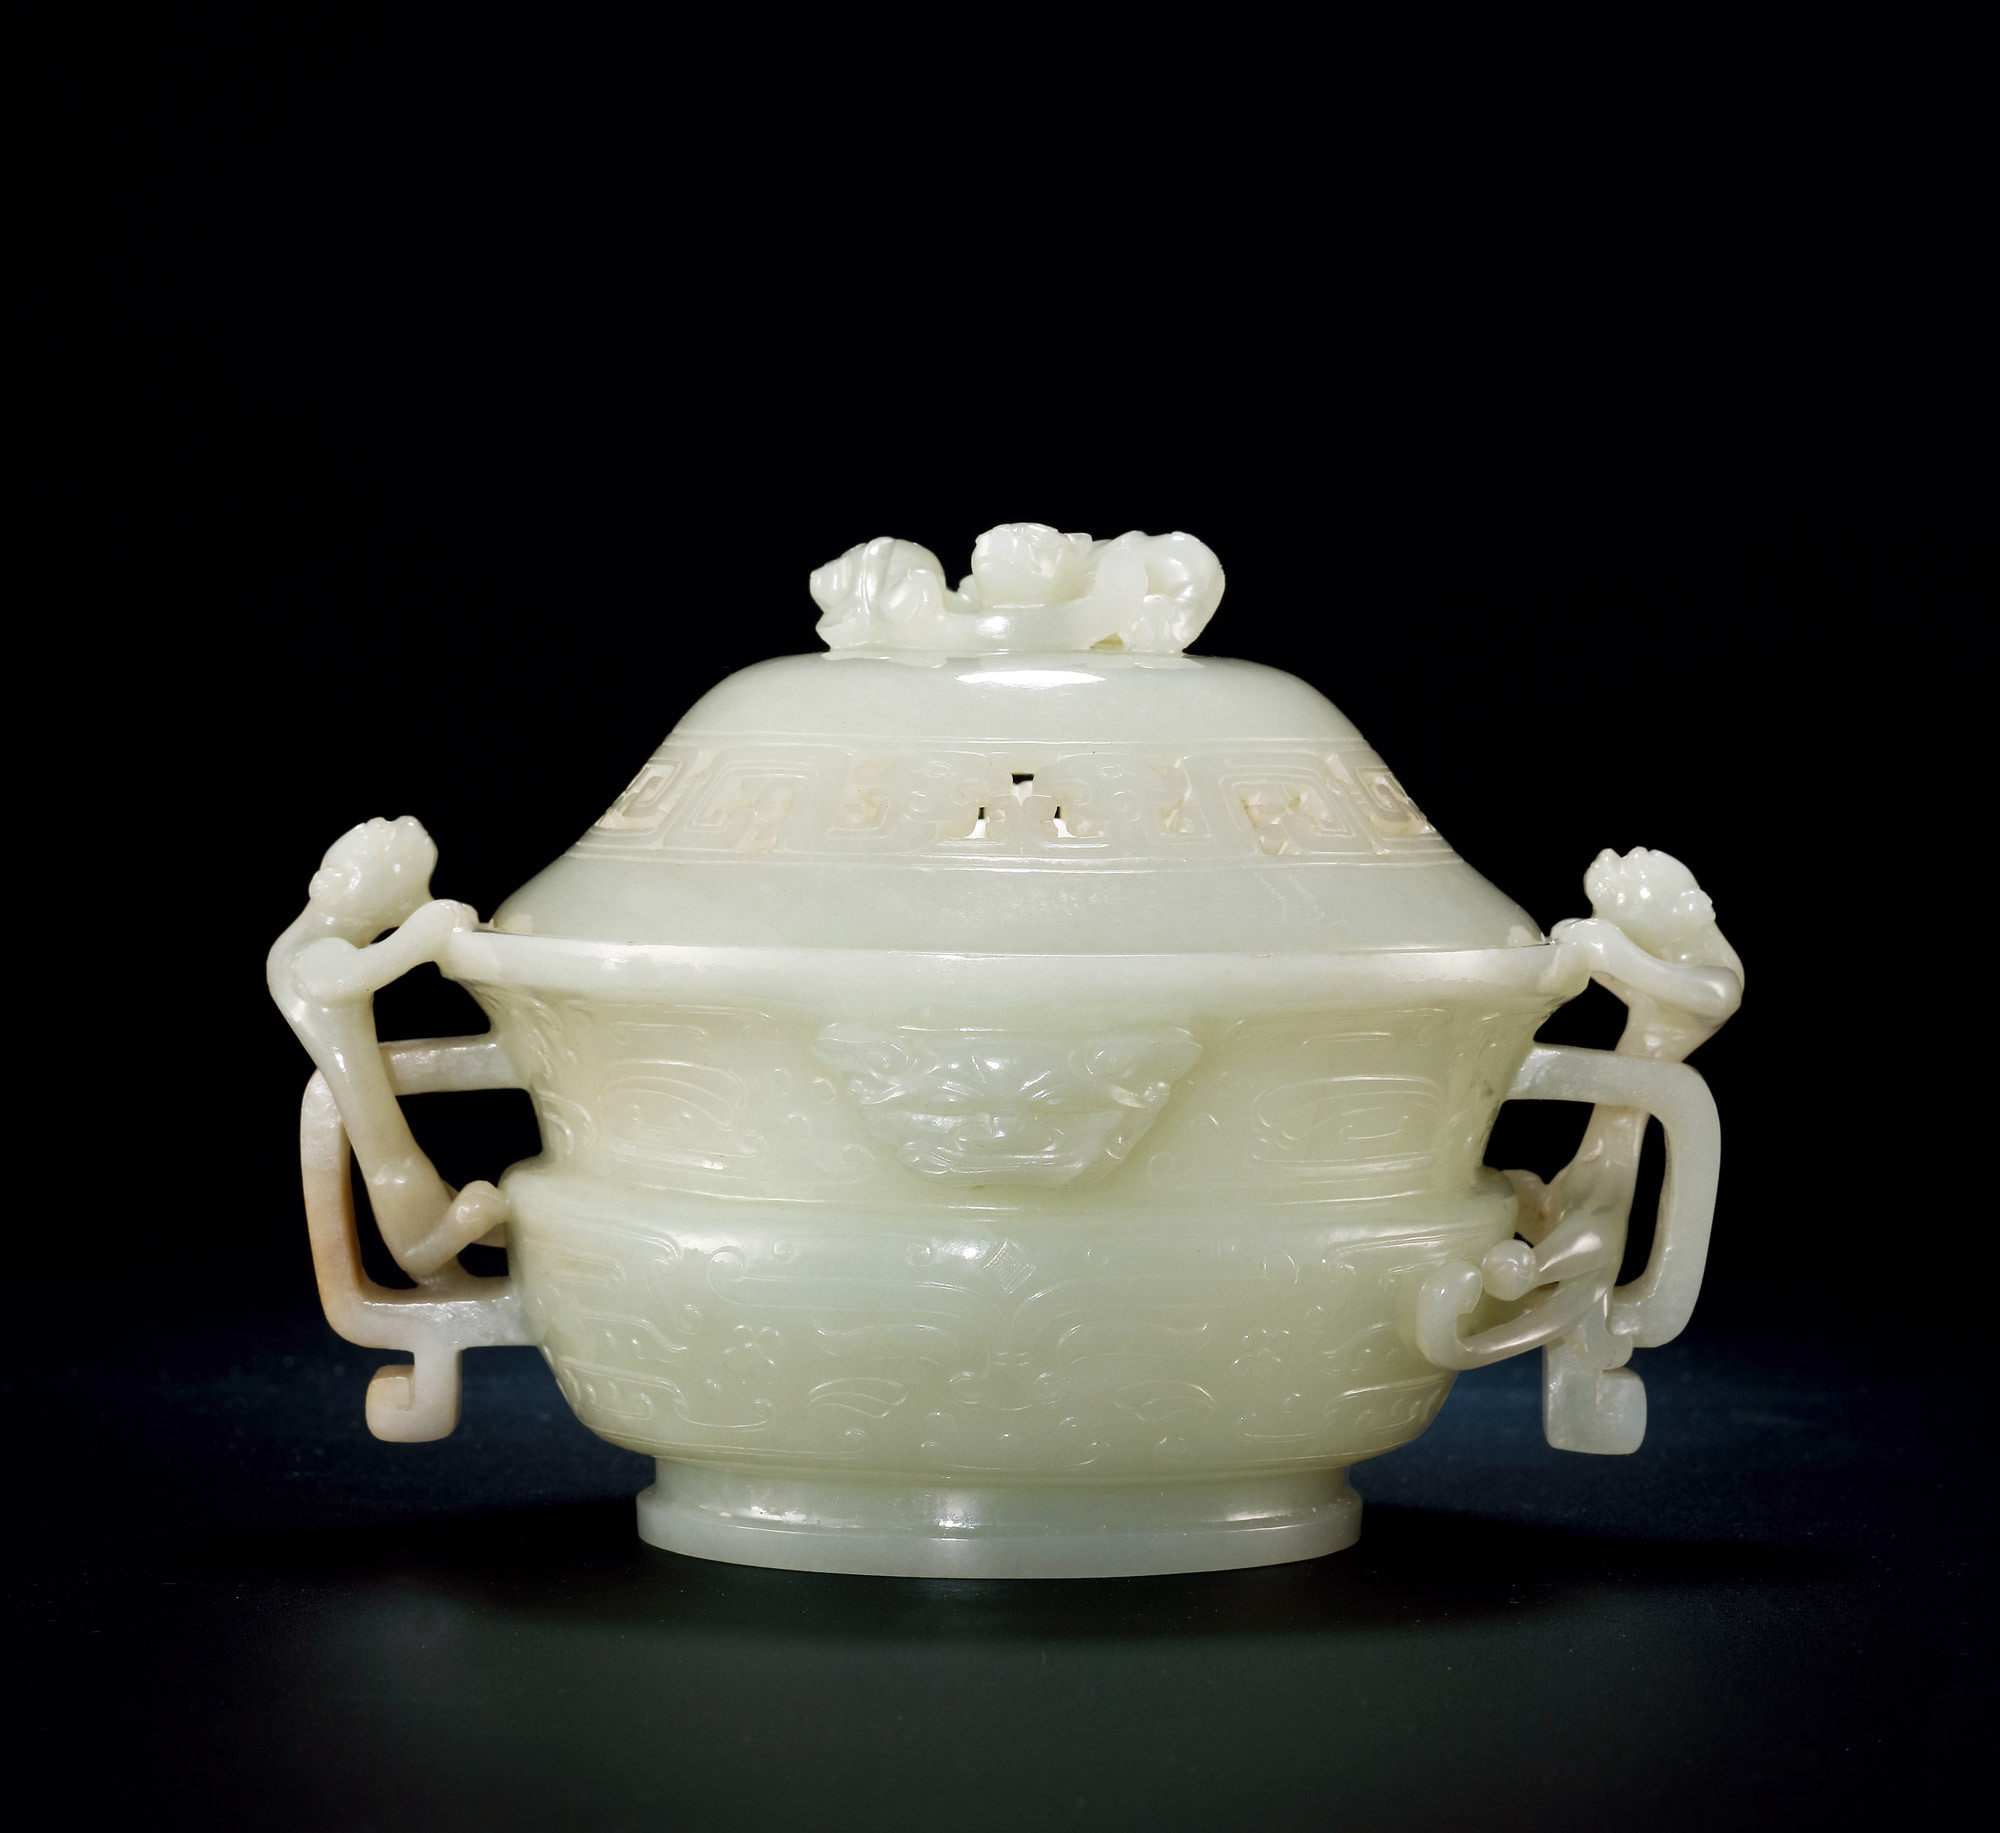 A CARVED WHITE JADE INCENSE BURNER WITH COVER, DECORATED BY BEAST FACE AND CHI-DRAGON HANDLES